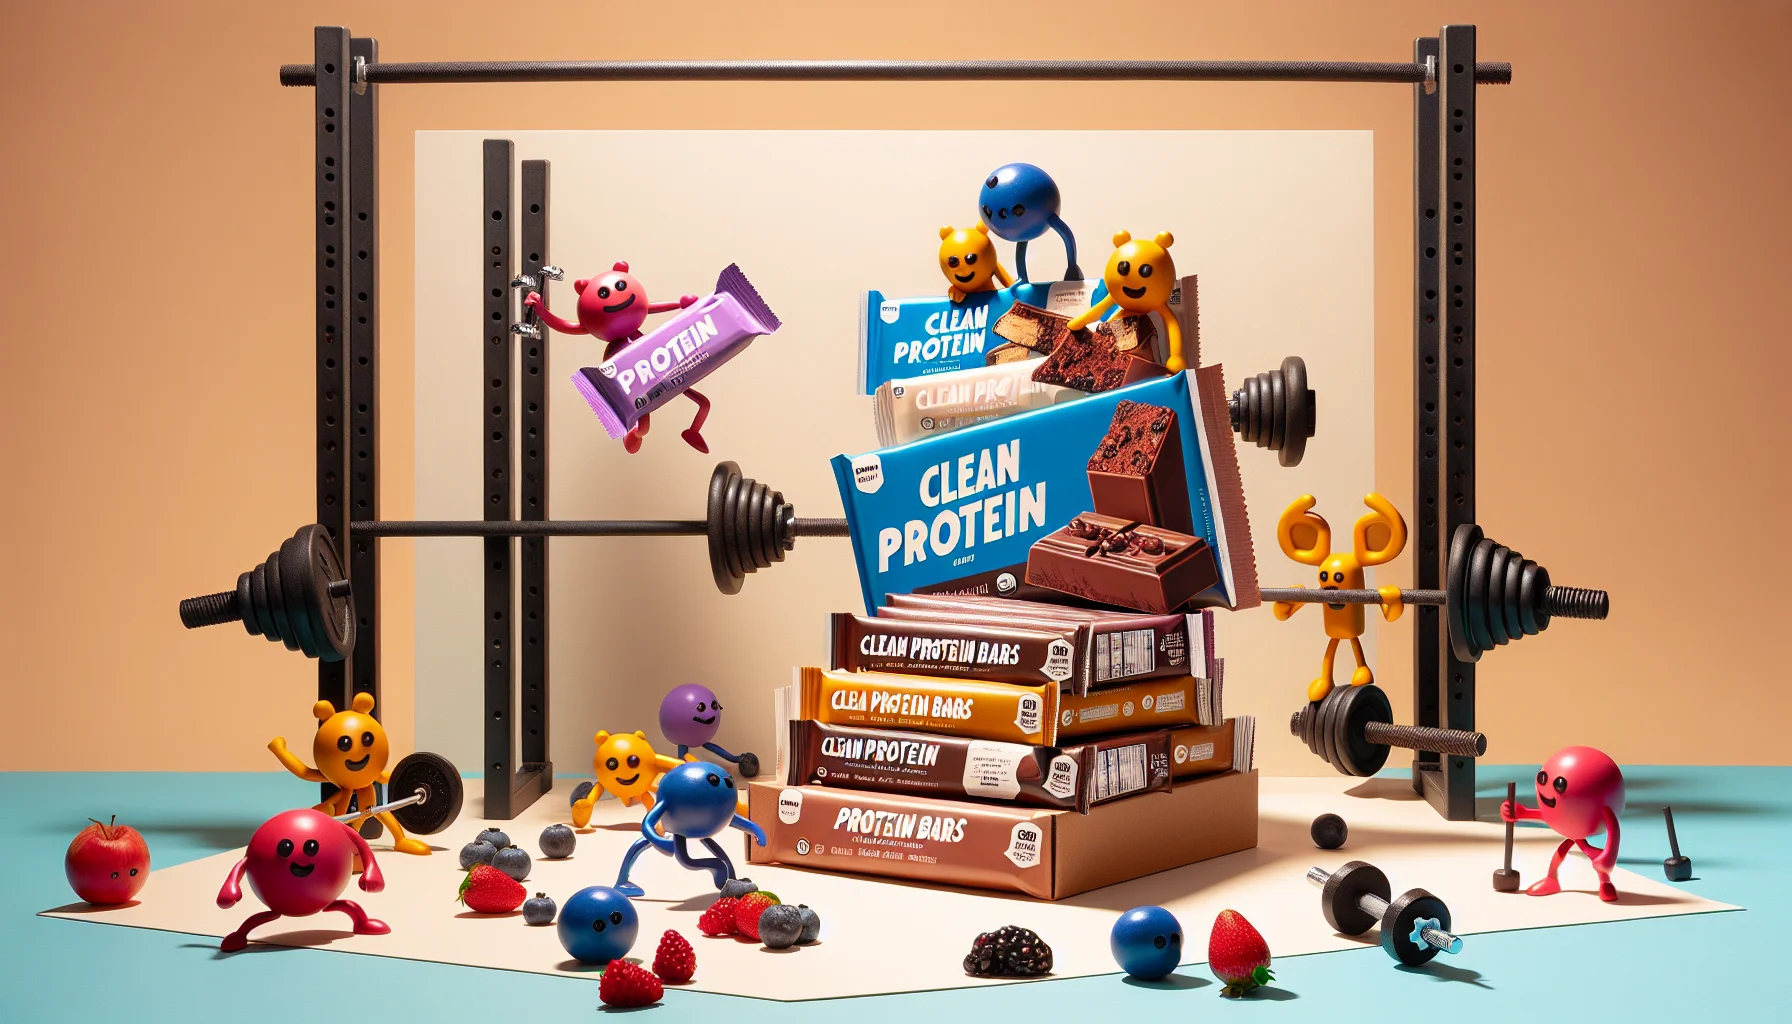 Create an image of a whimsical sports-themed scenario. In the center, present a display of clean protein bars, each of different flavors like chocolate, vanilla, and berries, looking appetizing and healthy. Their labels highlight the high-quality, organic ingredients for clean dieting. To evoke humor, create a scene where character-shaped weights of different sizes are eagerly trying to reach for these bars, with dumbbells 'rolling', kettlebells 'hoping', and weight plates 'sliding' towards them. The scene conveys the idea that even sports equipment can't resist these protein bars. Make sure the setting is vibrant, and the color palette is appetizing.